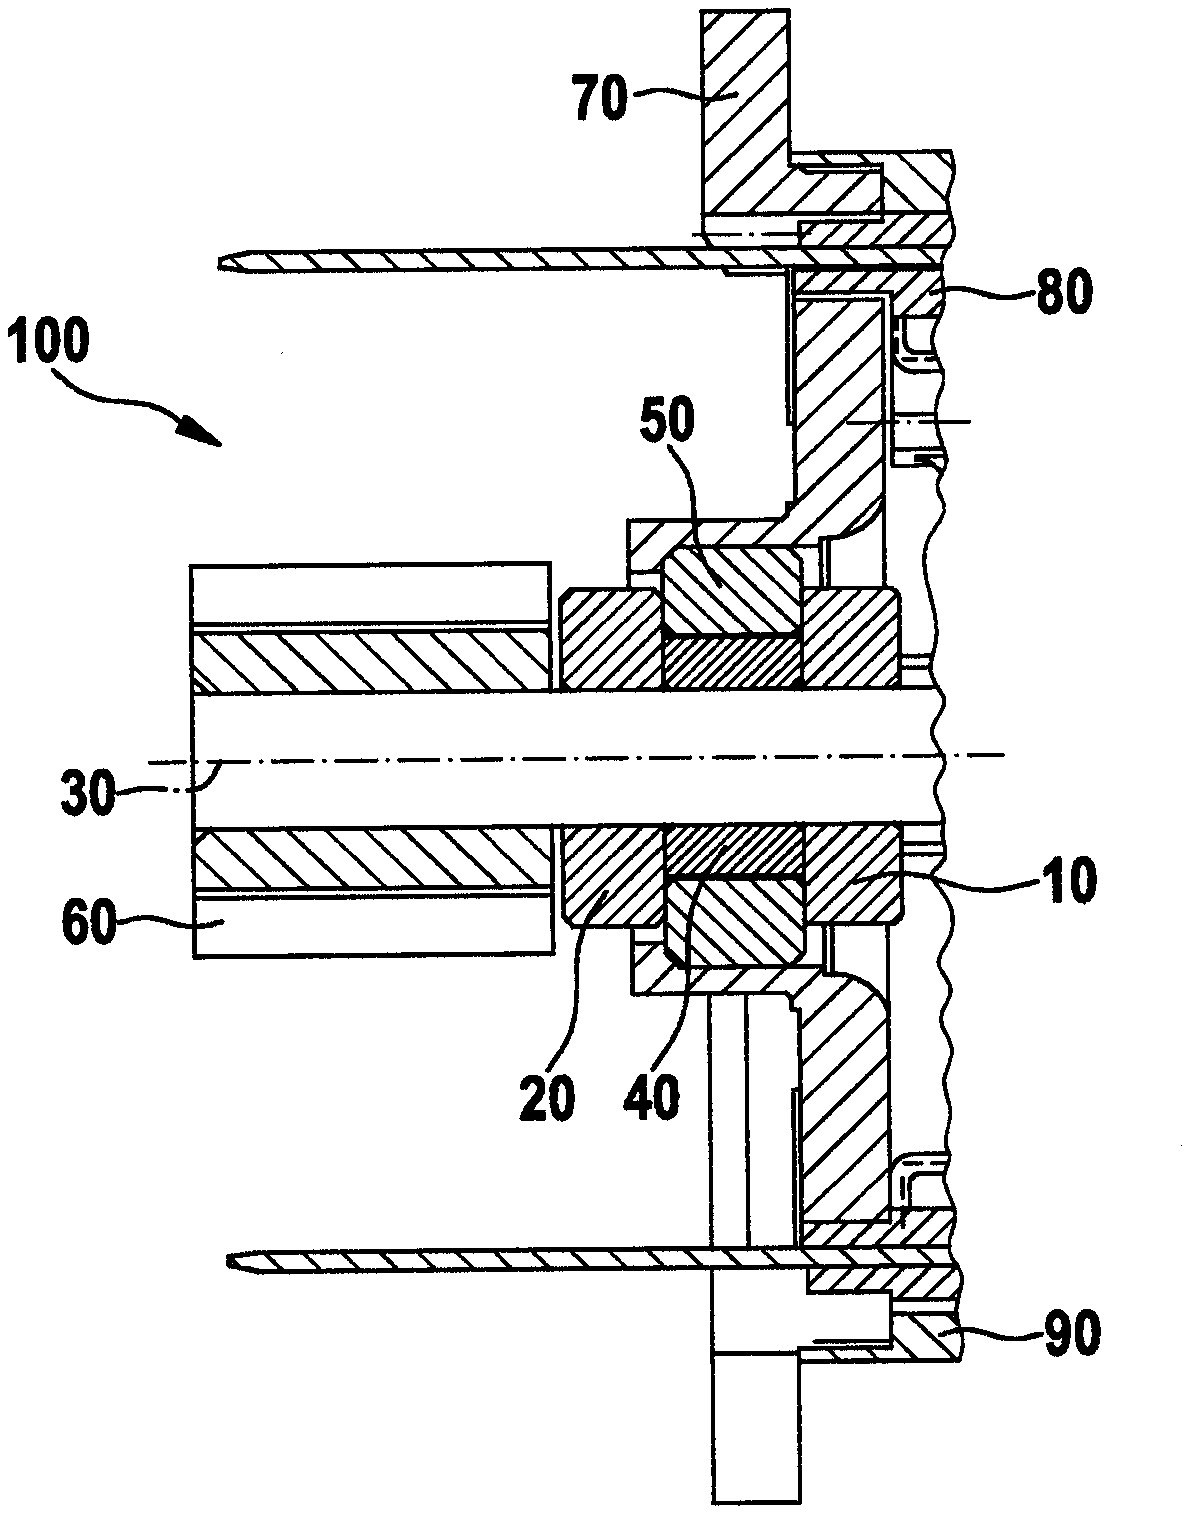 Method for adjusting the axial play between a motor armature and a bearing, and seat for an armature shaft